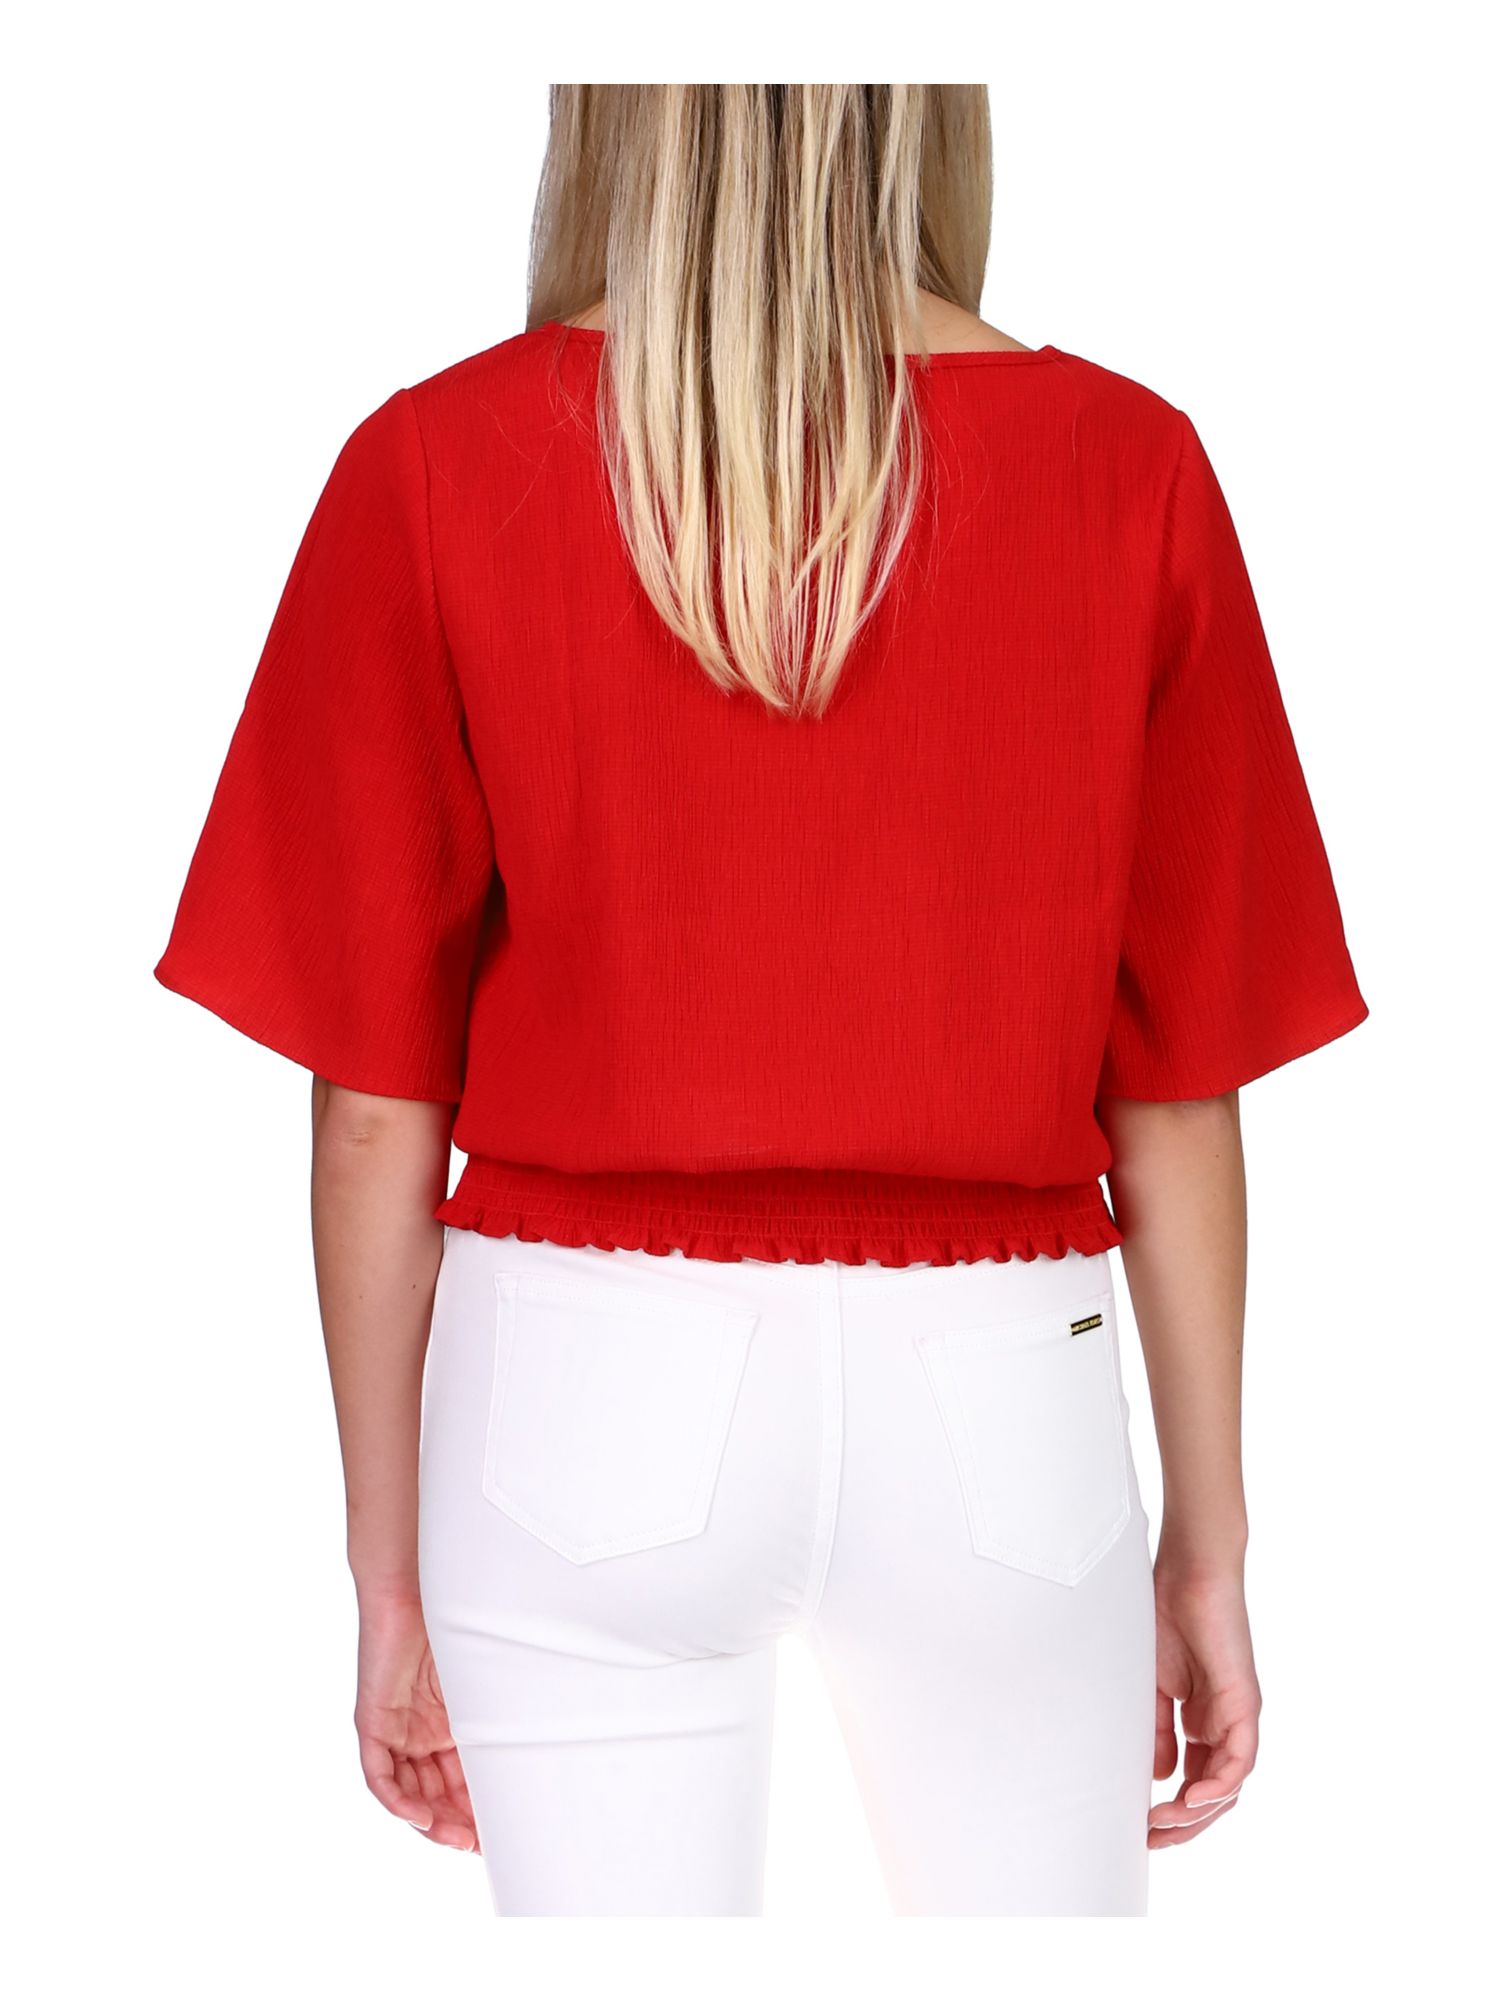 Michael Kors MICHAEL MICHAEL KORS Womens Red Smocked Elbow Sleeve Boat Neck Wear To Work Top Petites PS